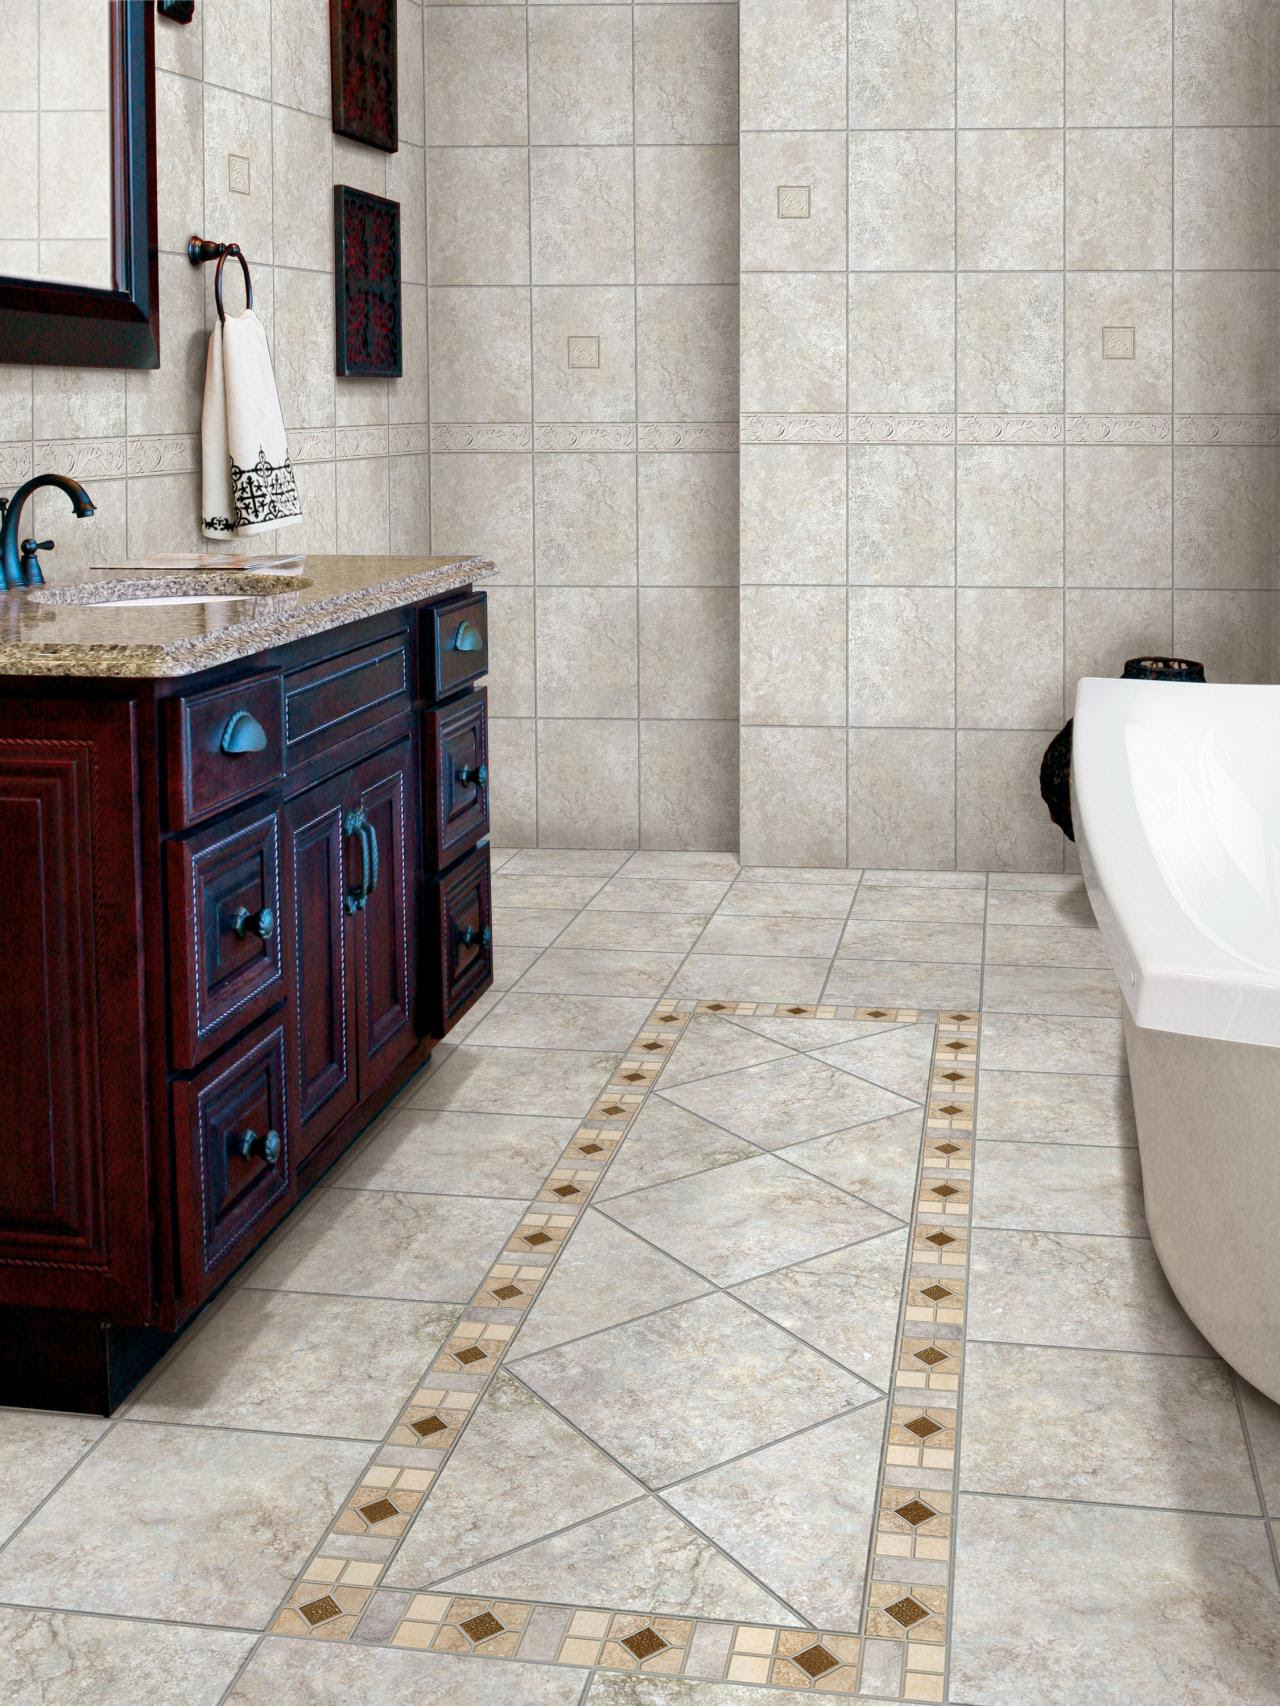 How to tiling a bathroom floor - right tips - Interior ...